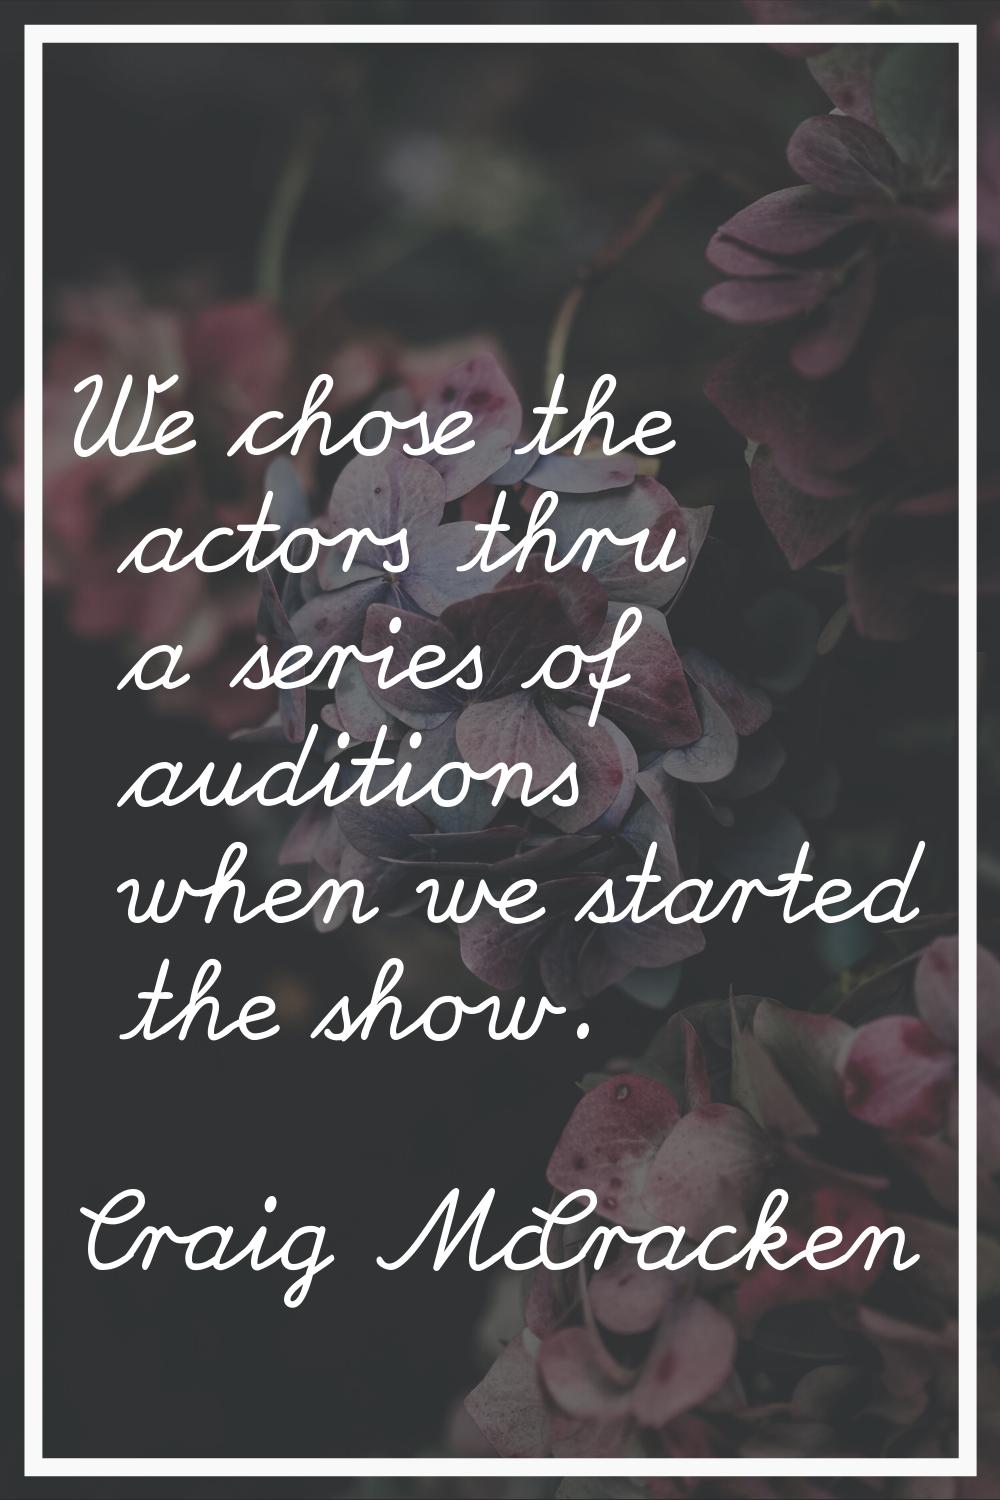 We chose the actors thru a series of auditions when we started the show.